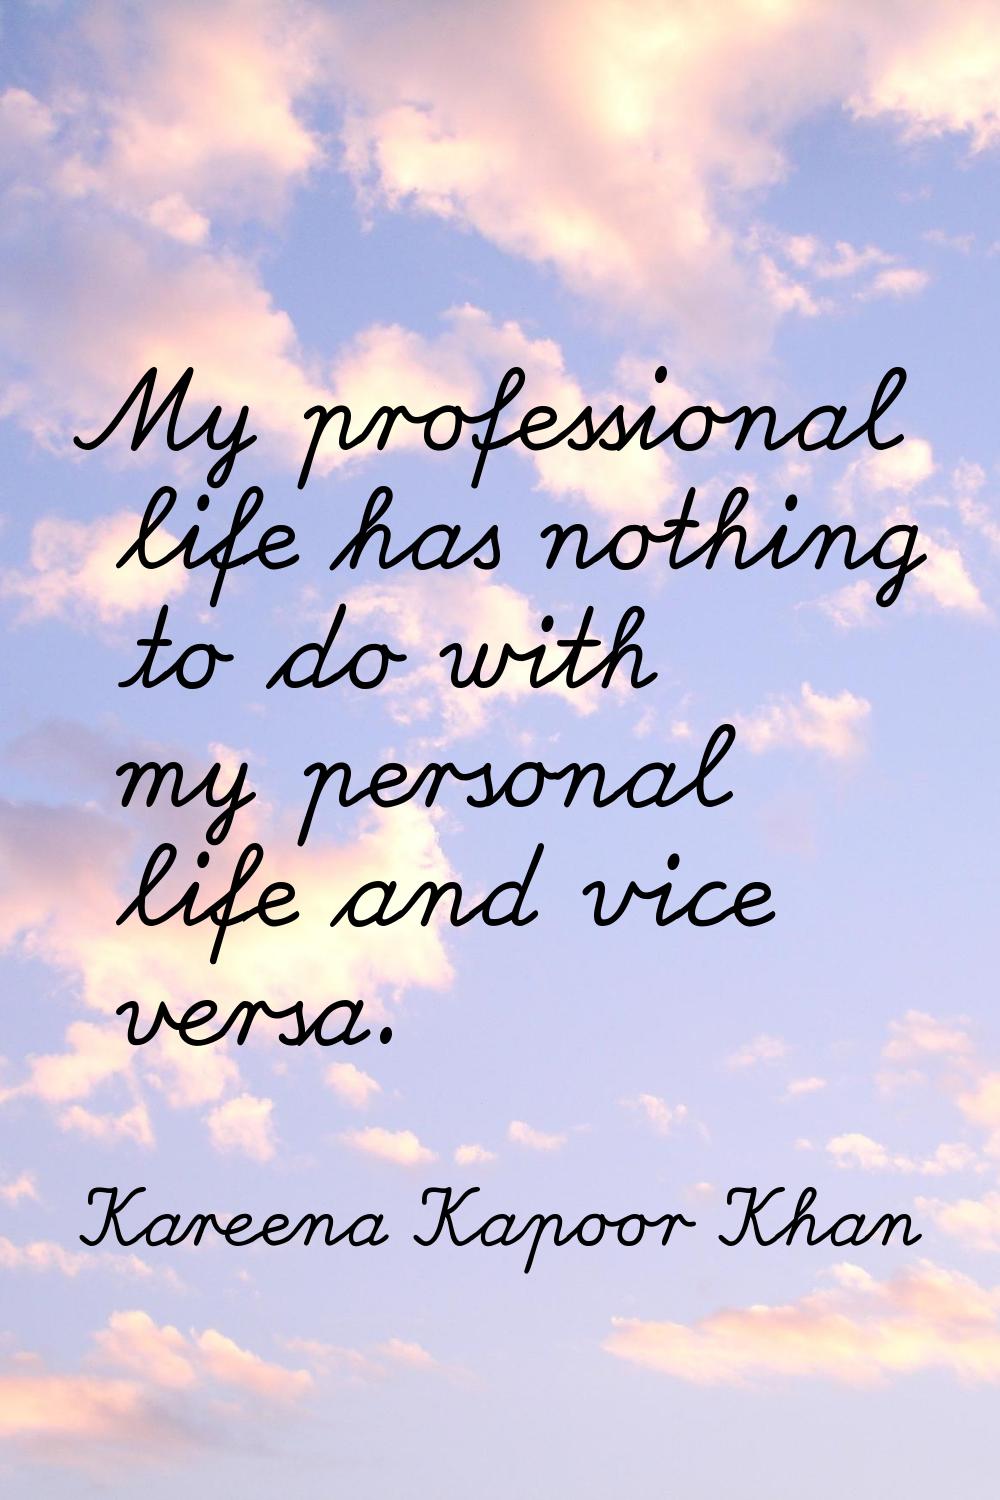 My professional life has nothing to do with my personal life and vice versa.